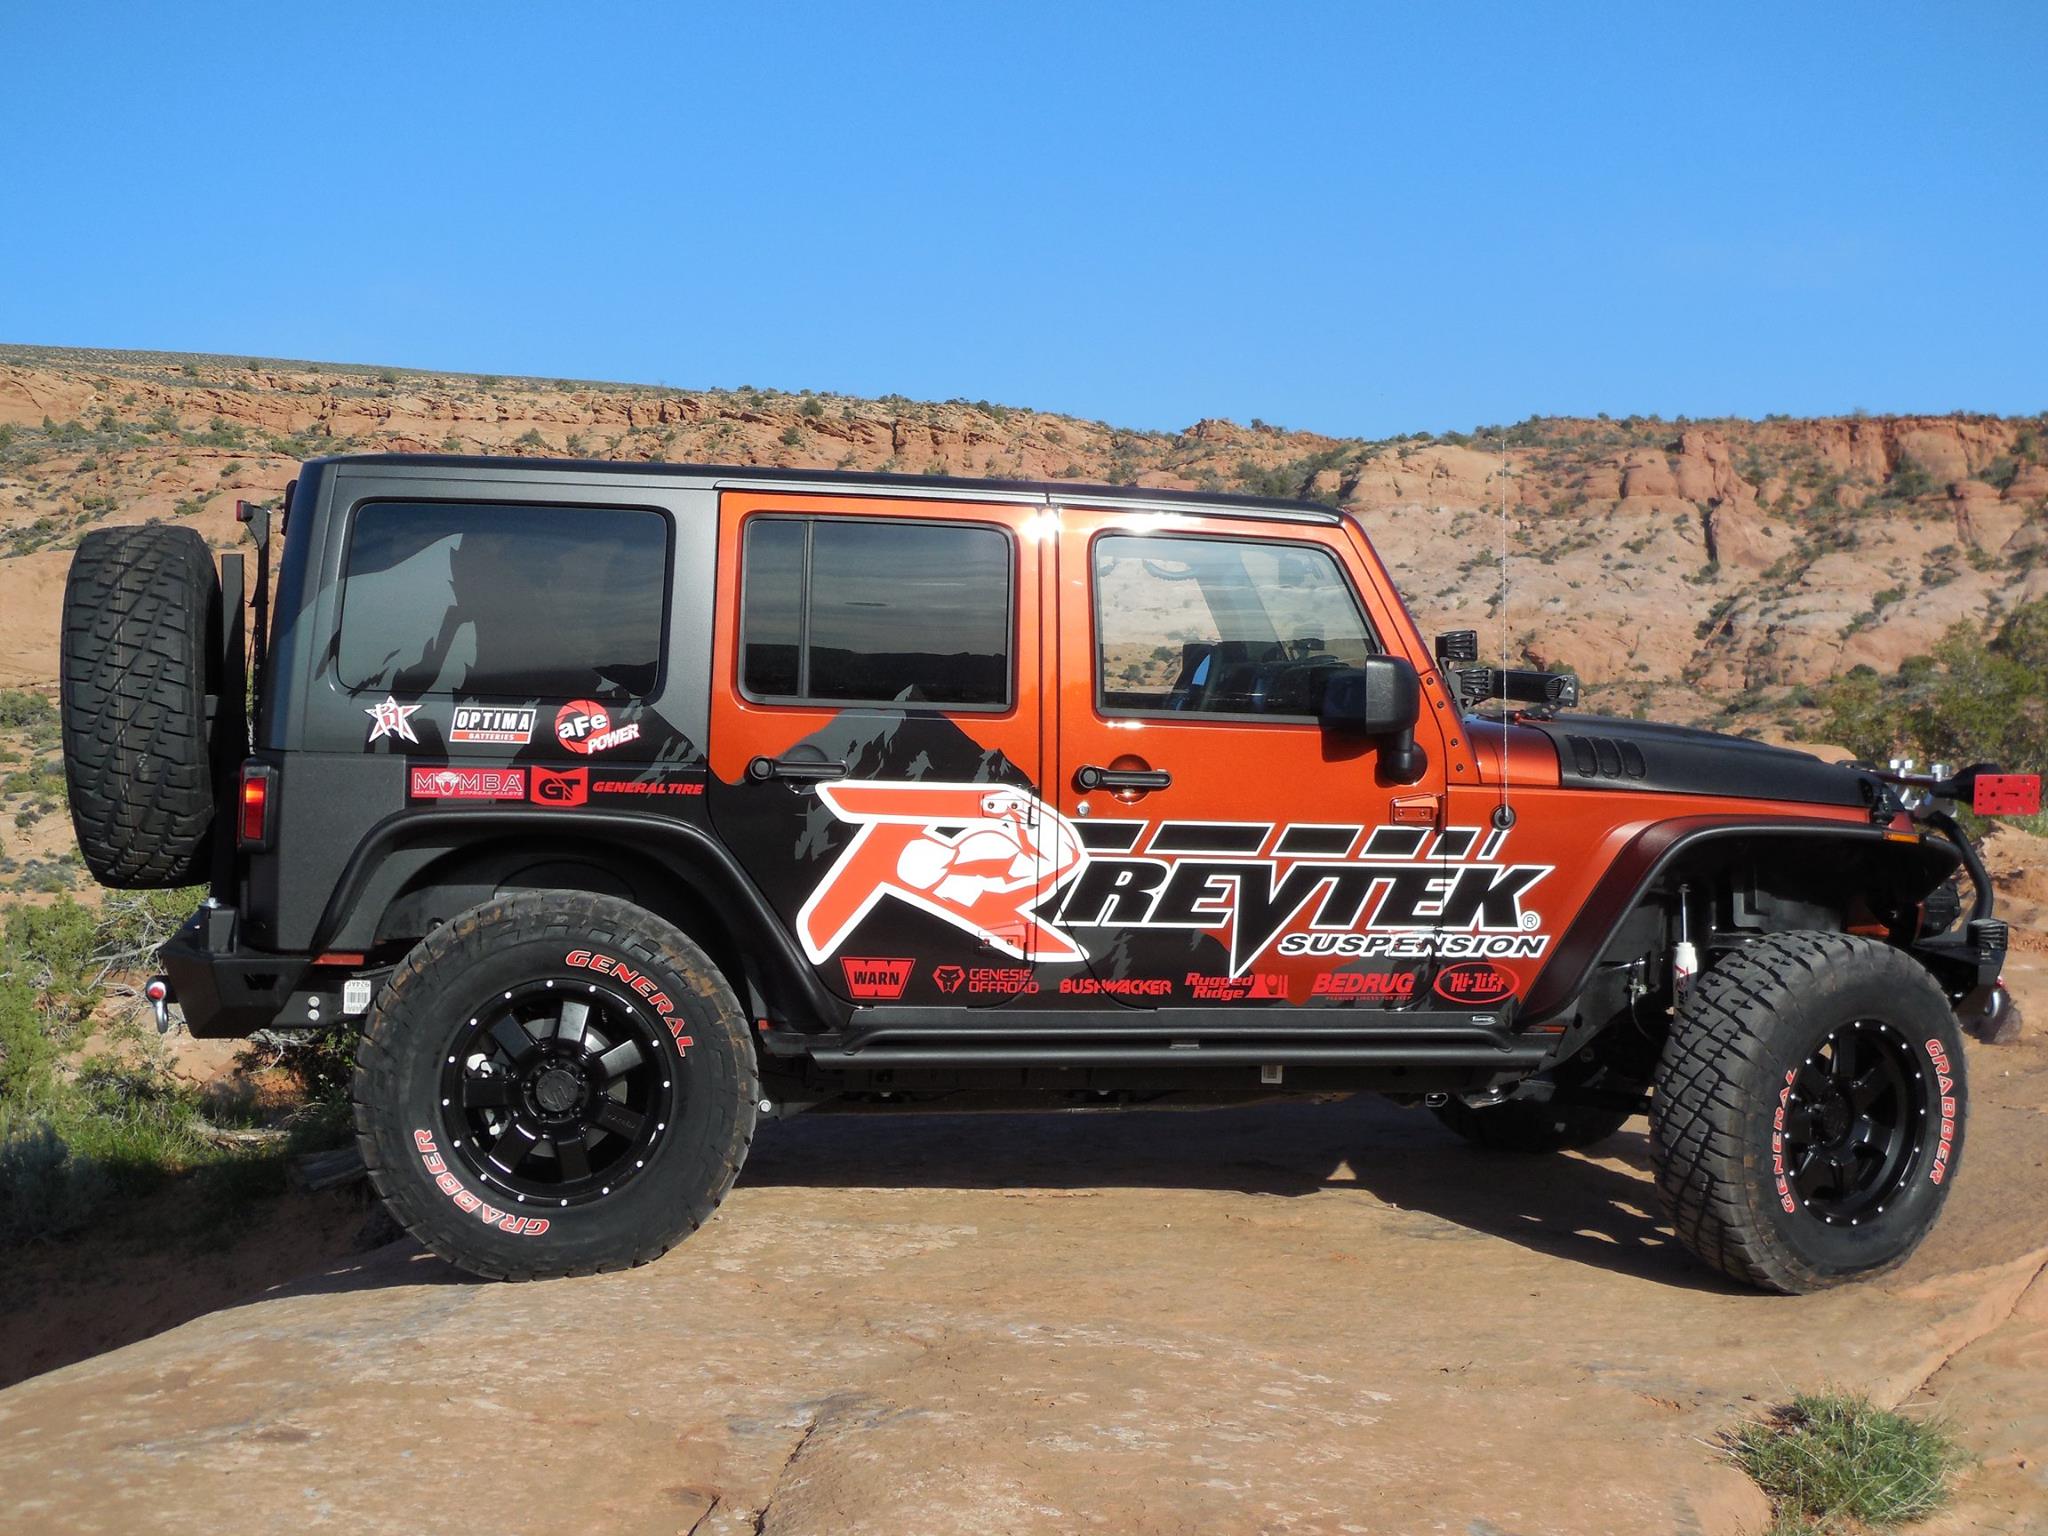 Revtek's lift kits are complete packages